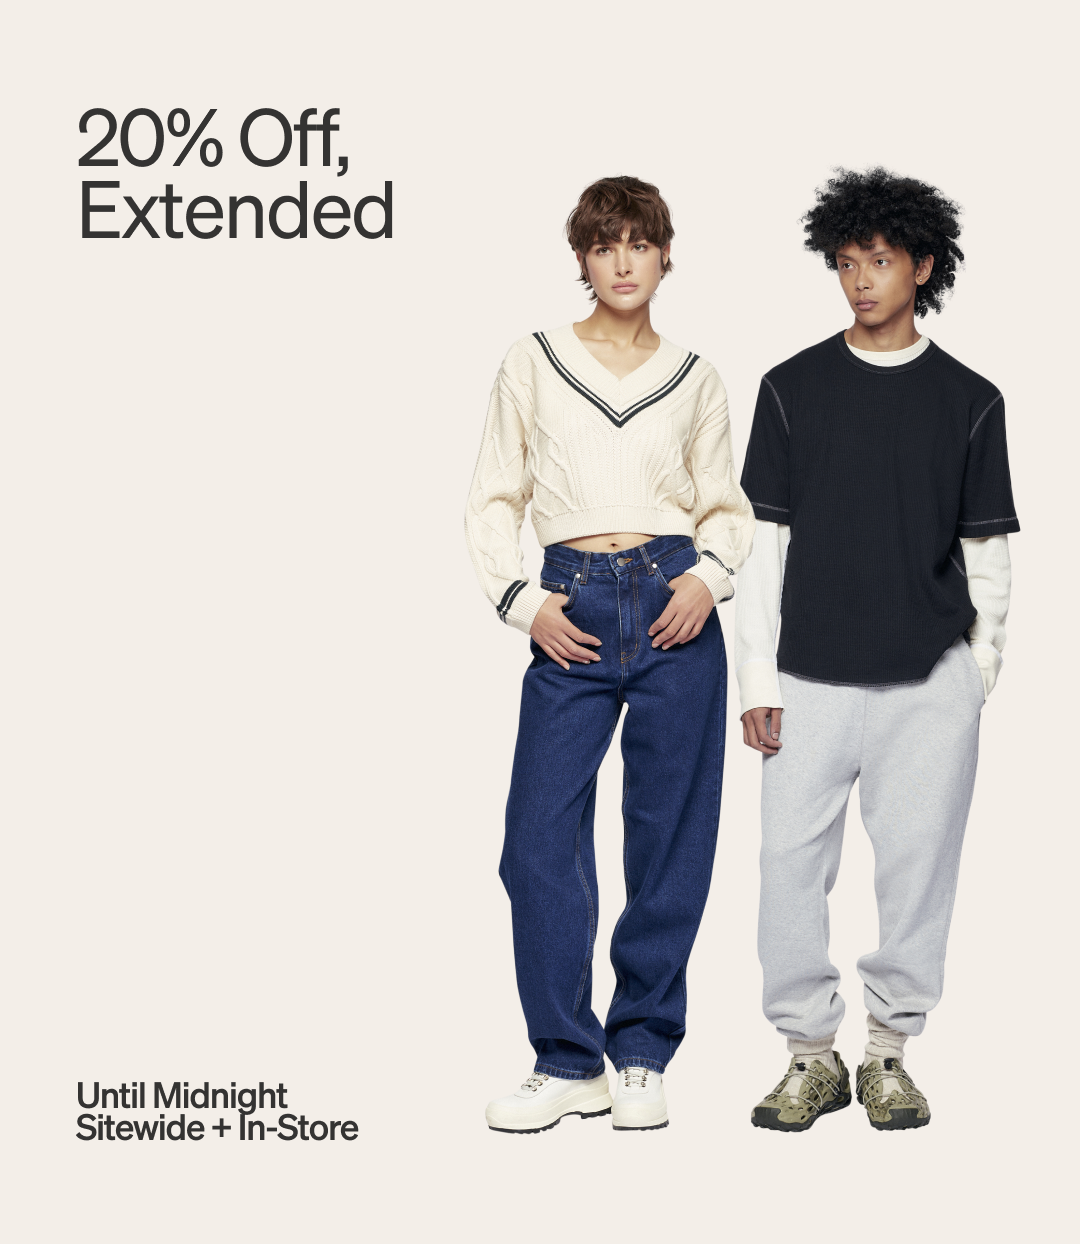 20% Off Everything